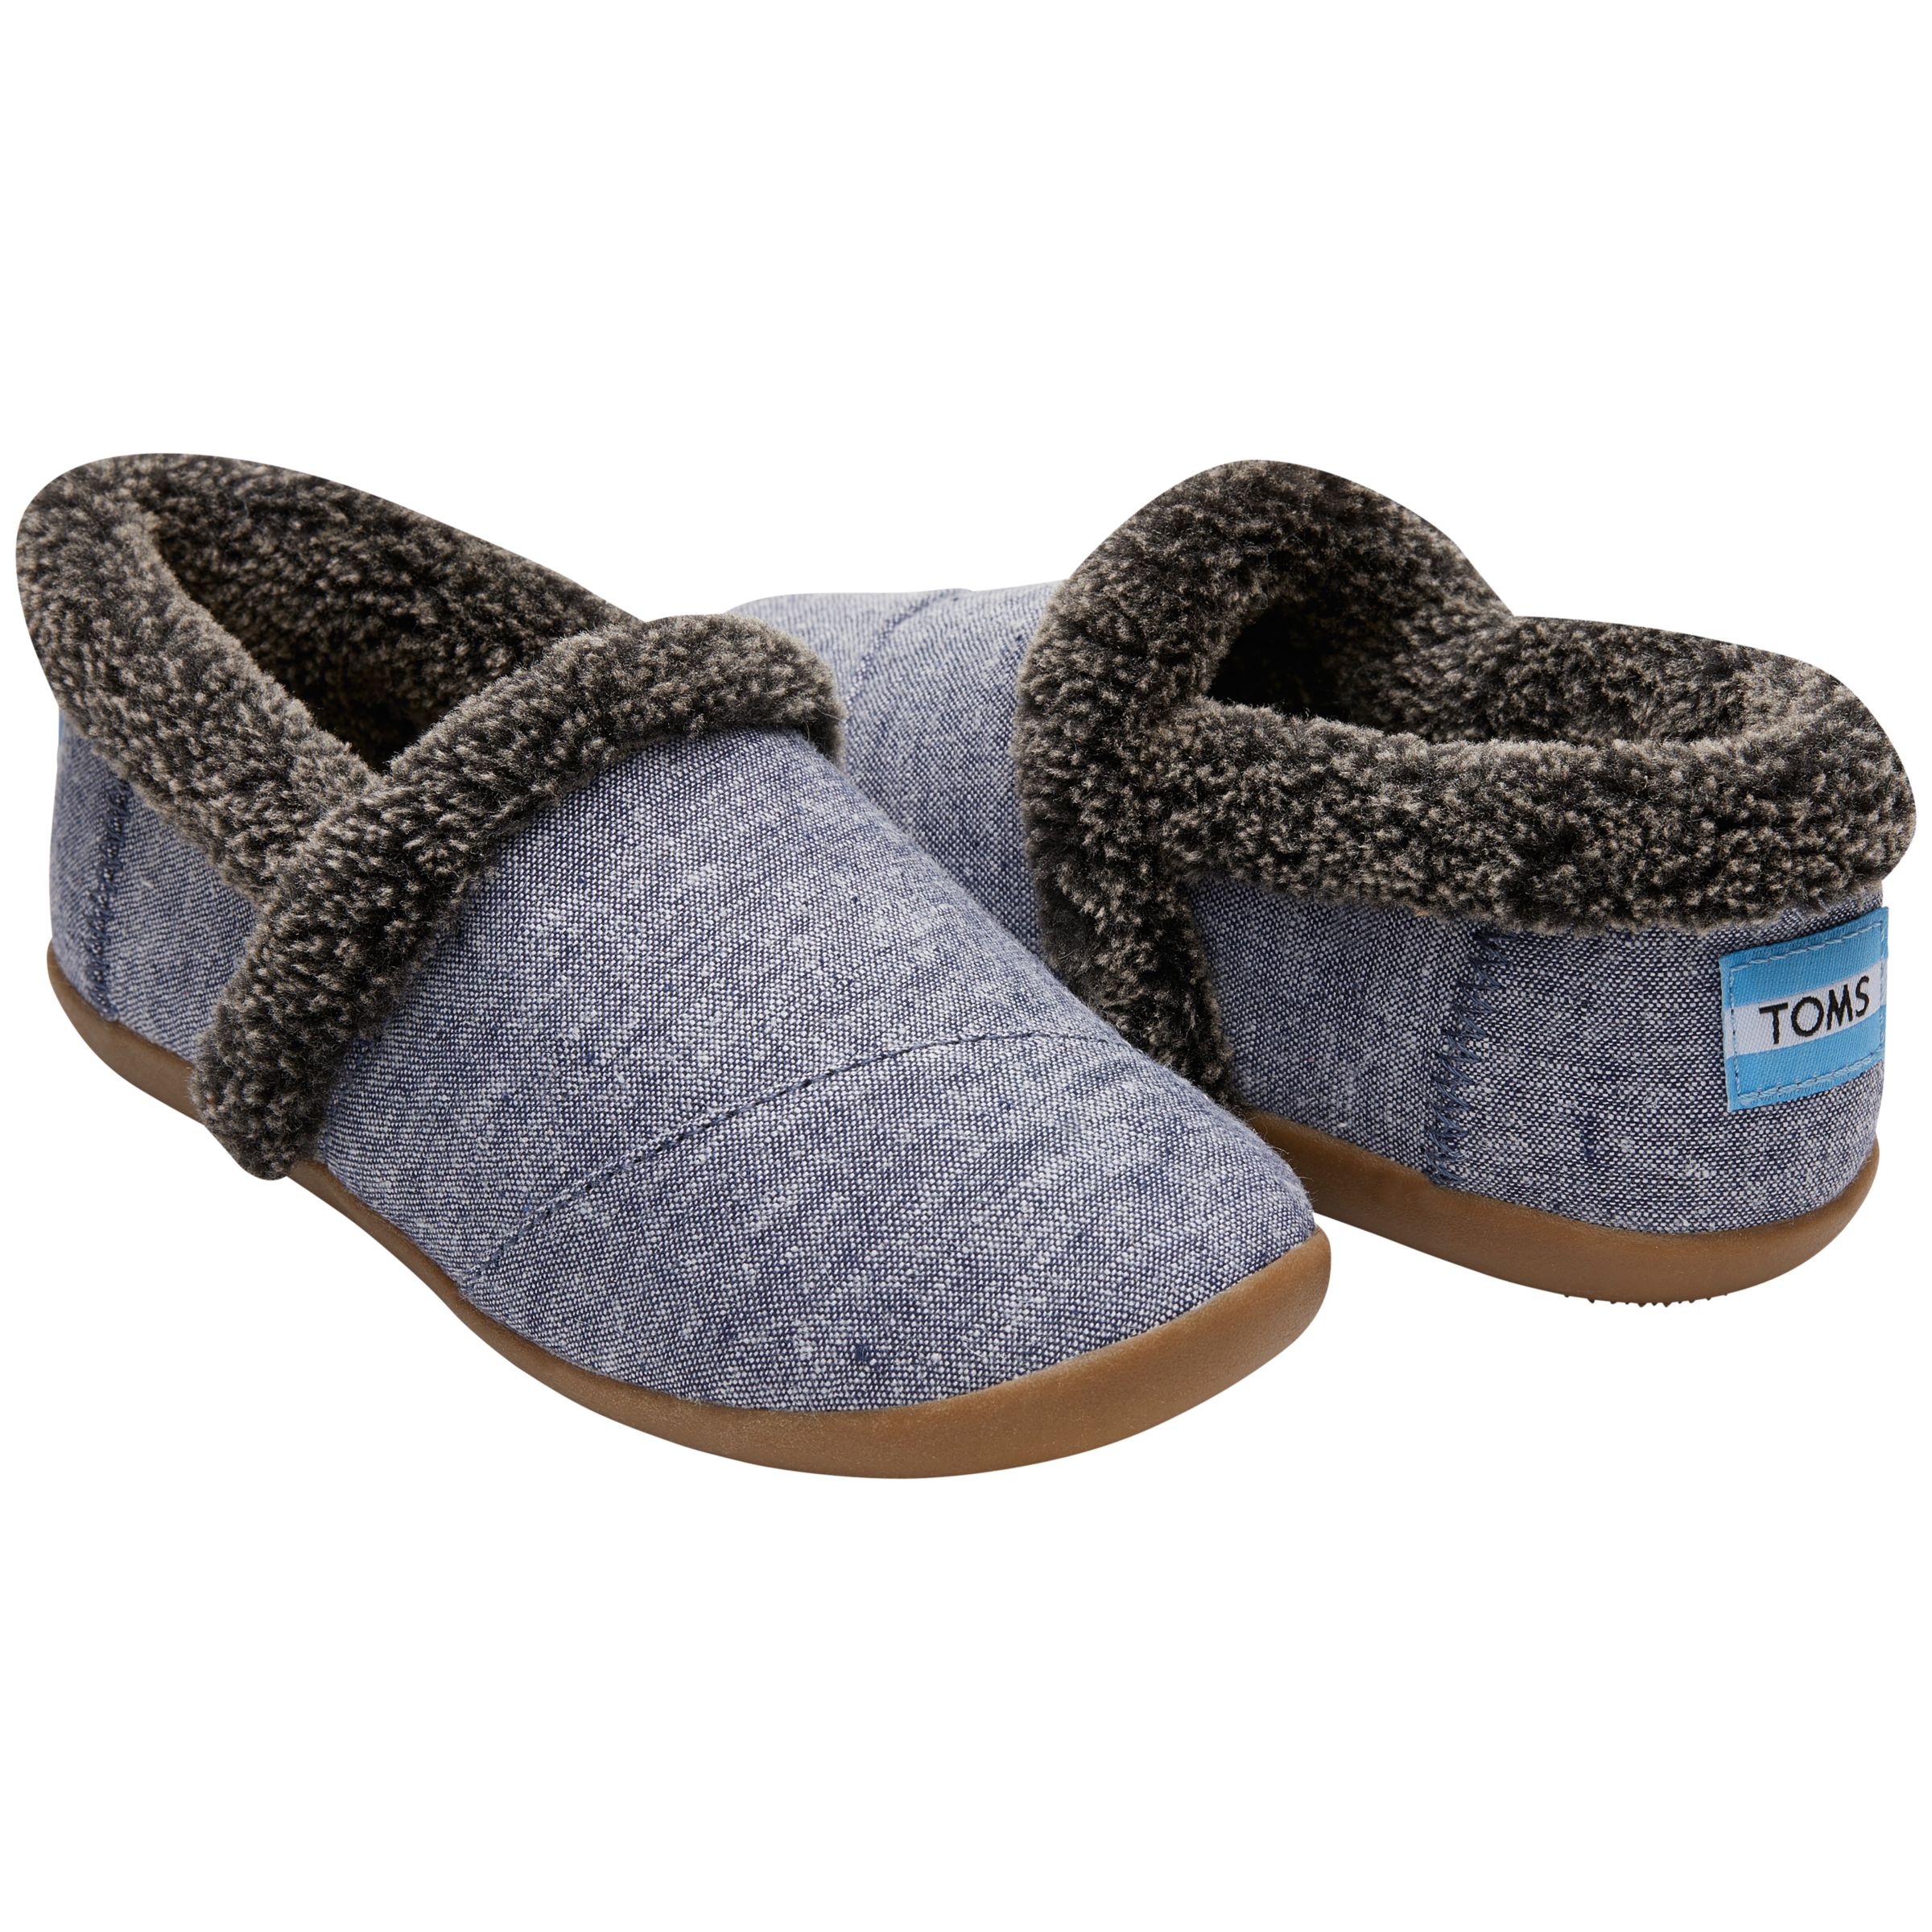 TOMS House Slippers, Chambray, 5 Jnr